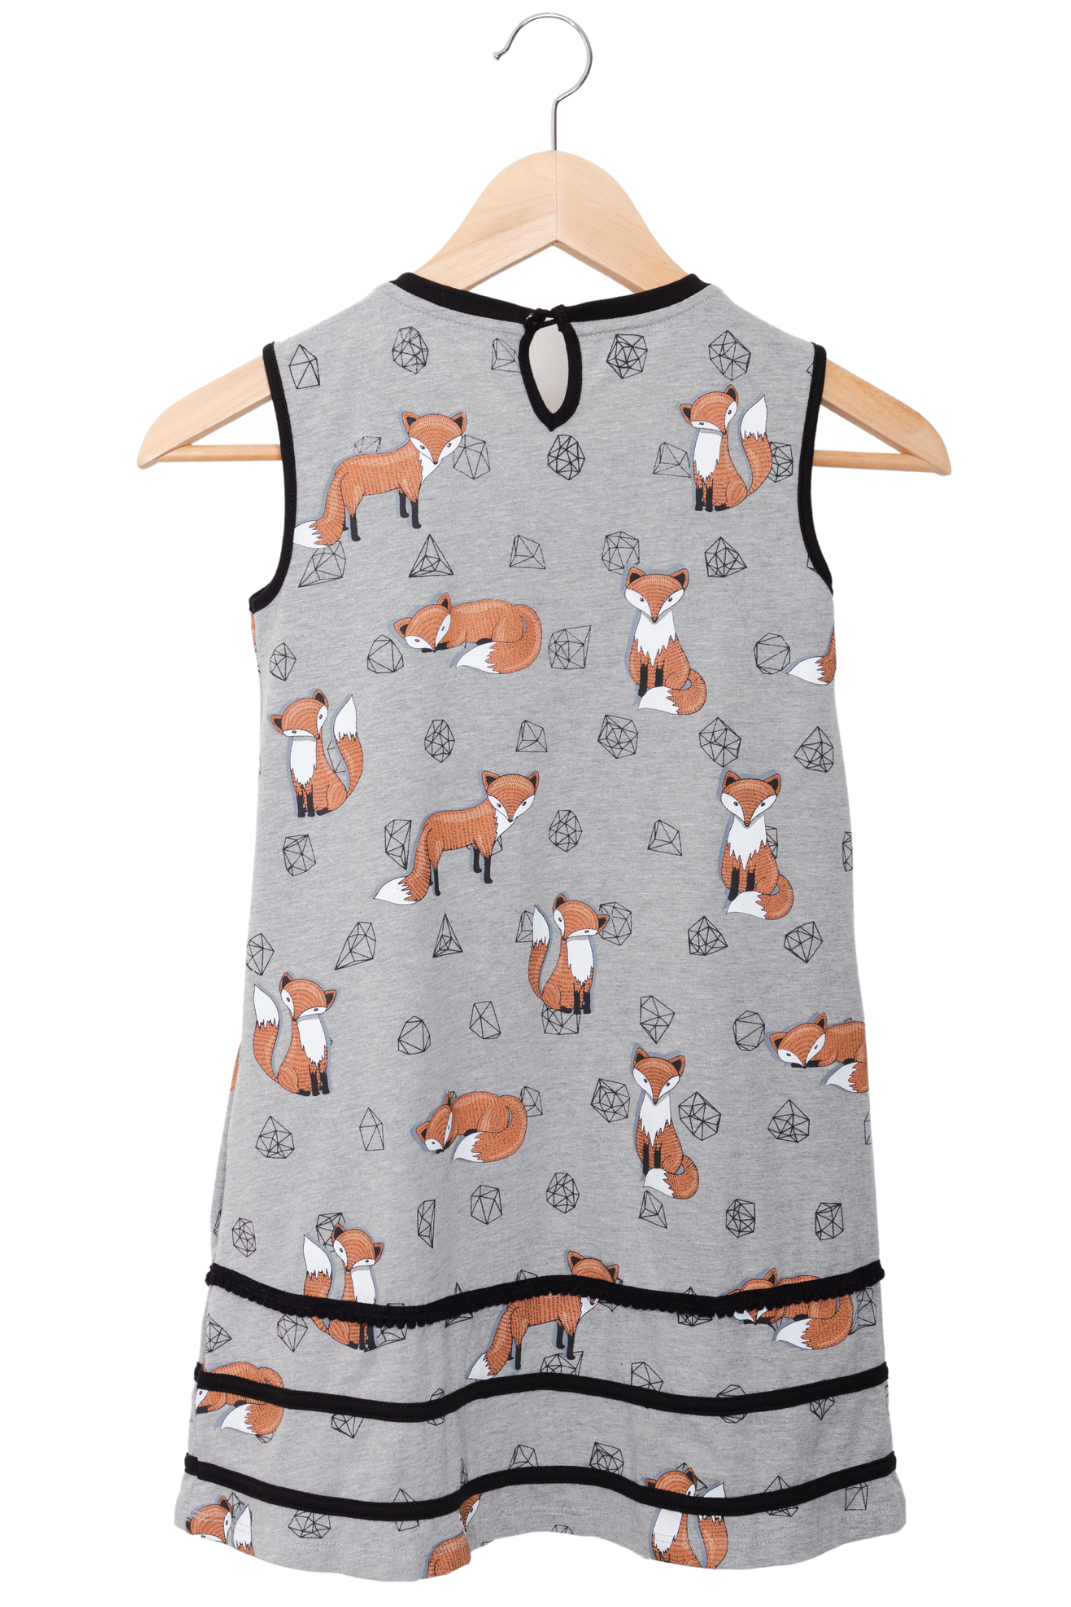 Grey dress with foxes and pockets. Sustainable materials, kids fashion, girl dress - Prisma Kiddos